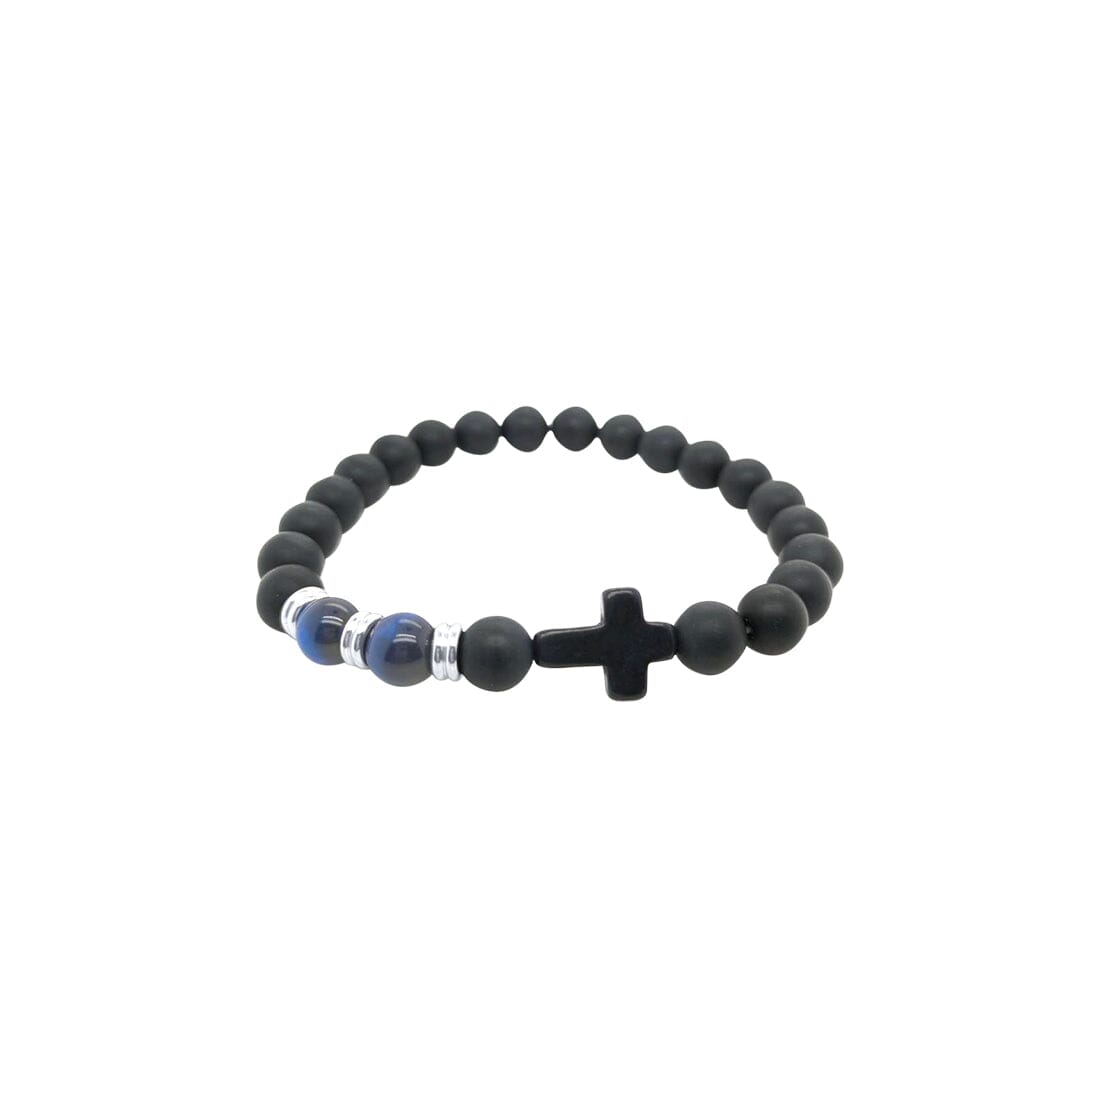 20.5cm Cross Bracelet with Black and Blue Beads in Stainless Steel Bracelets Bevilles 